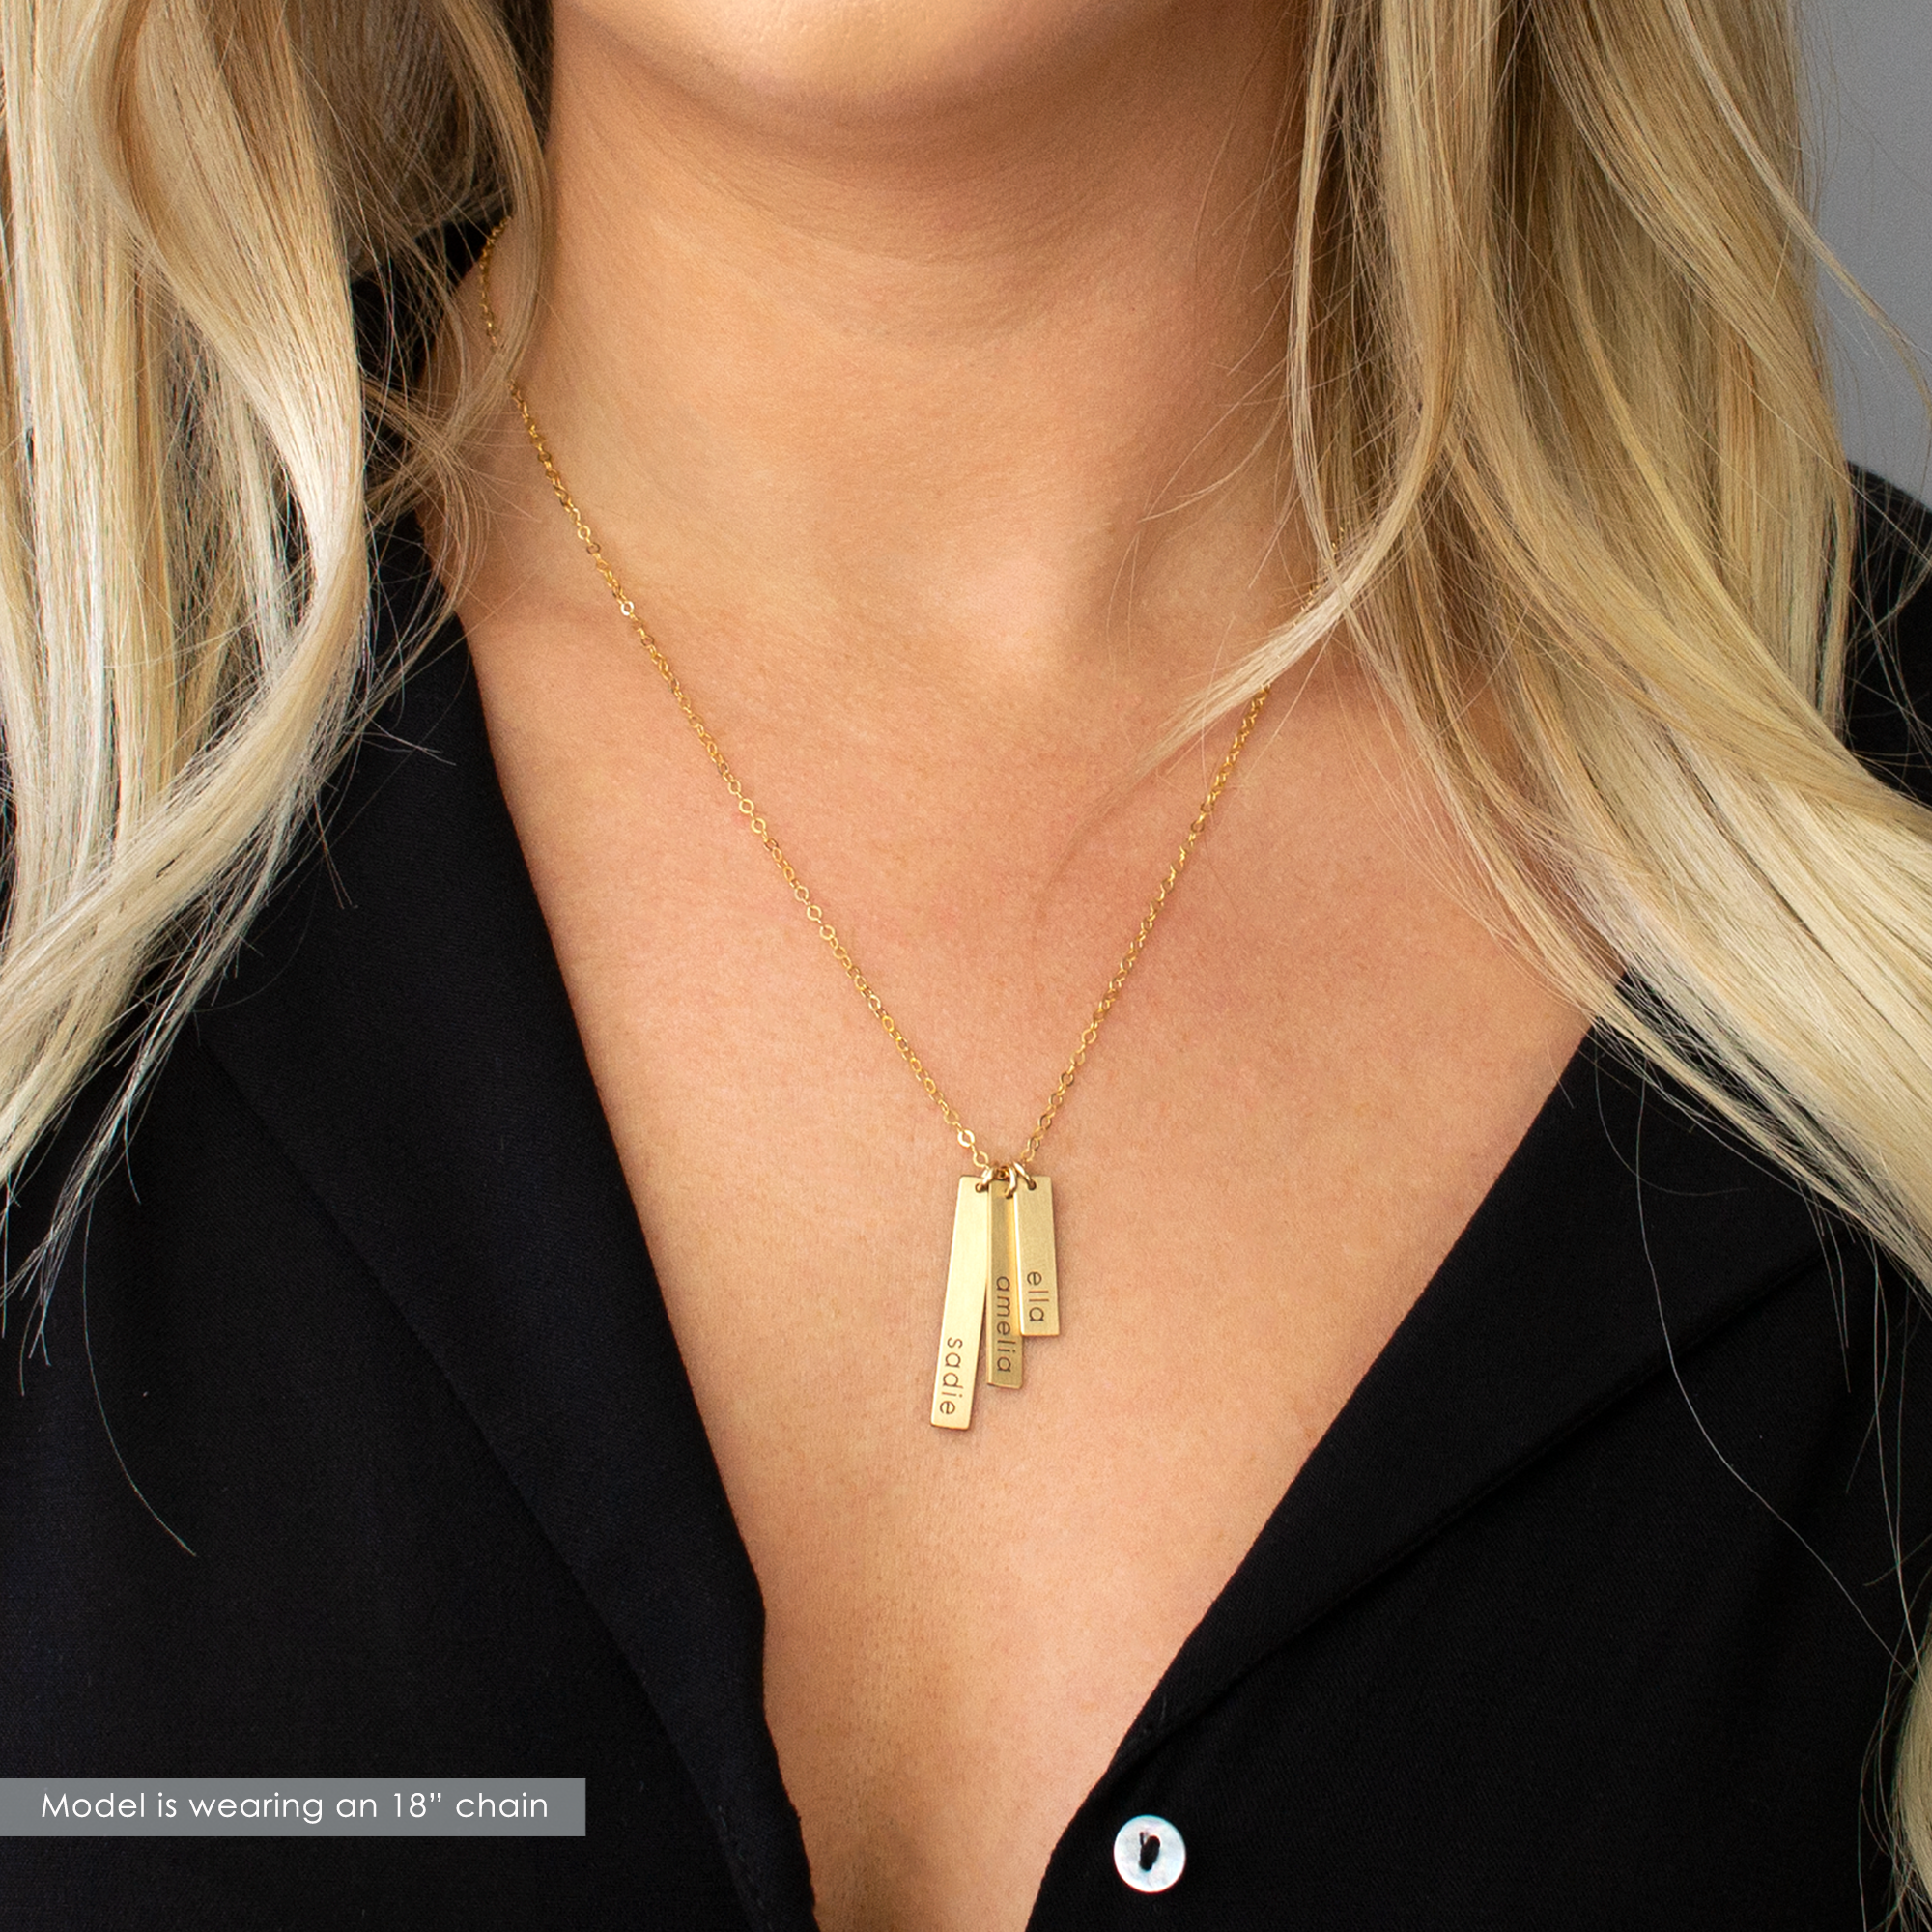 Layering Necklaces 101: Layering Lengths & Chain Mix Secrets